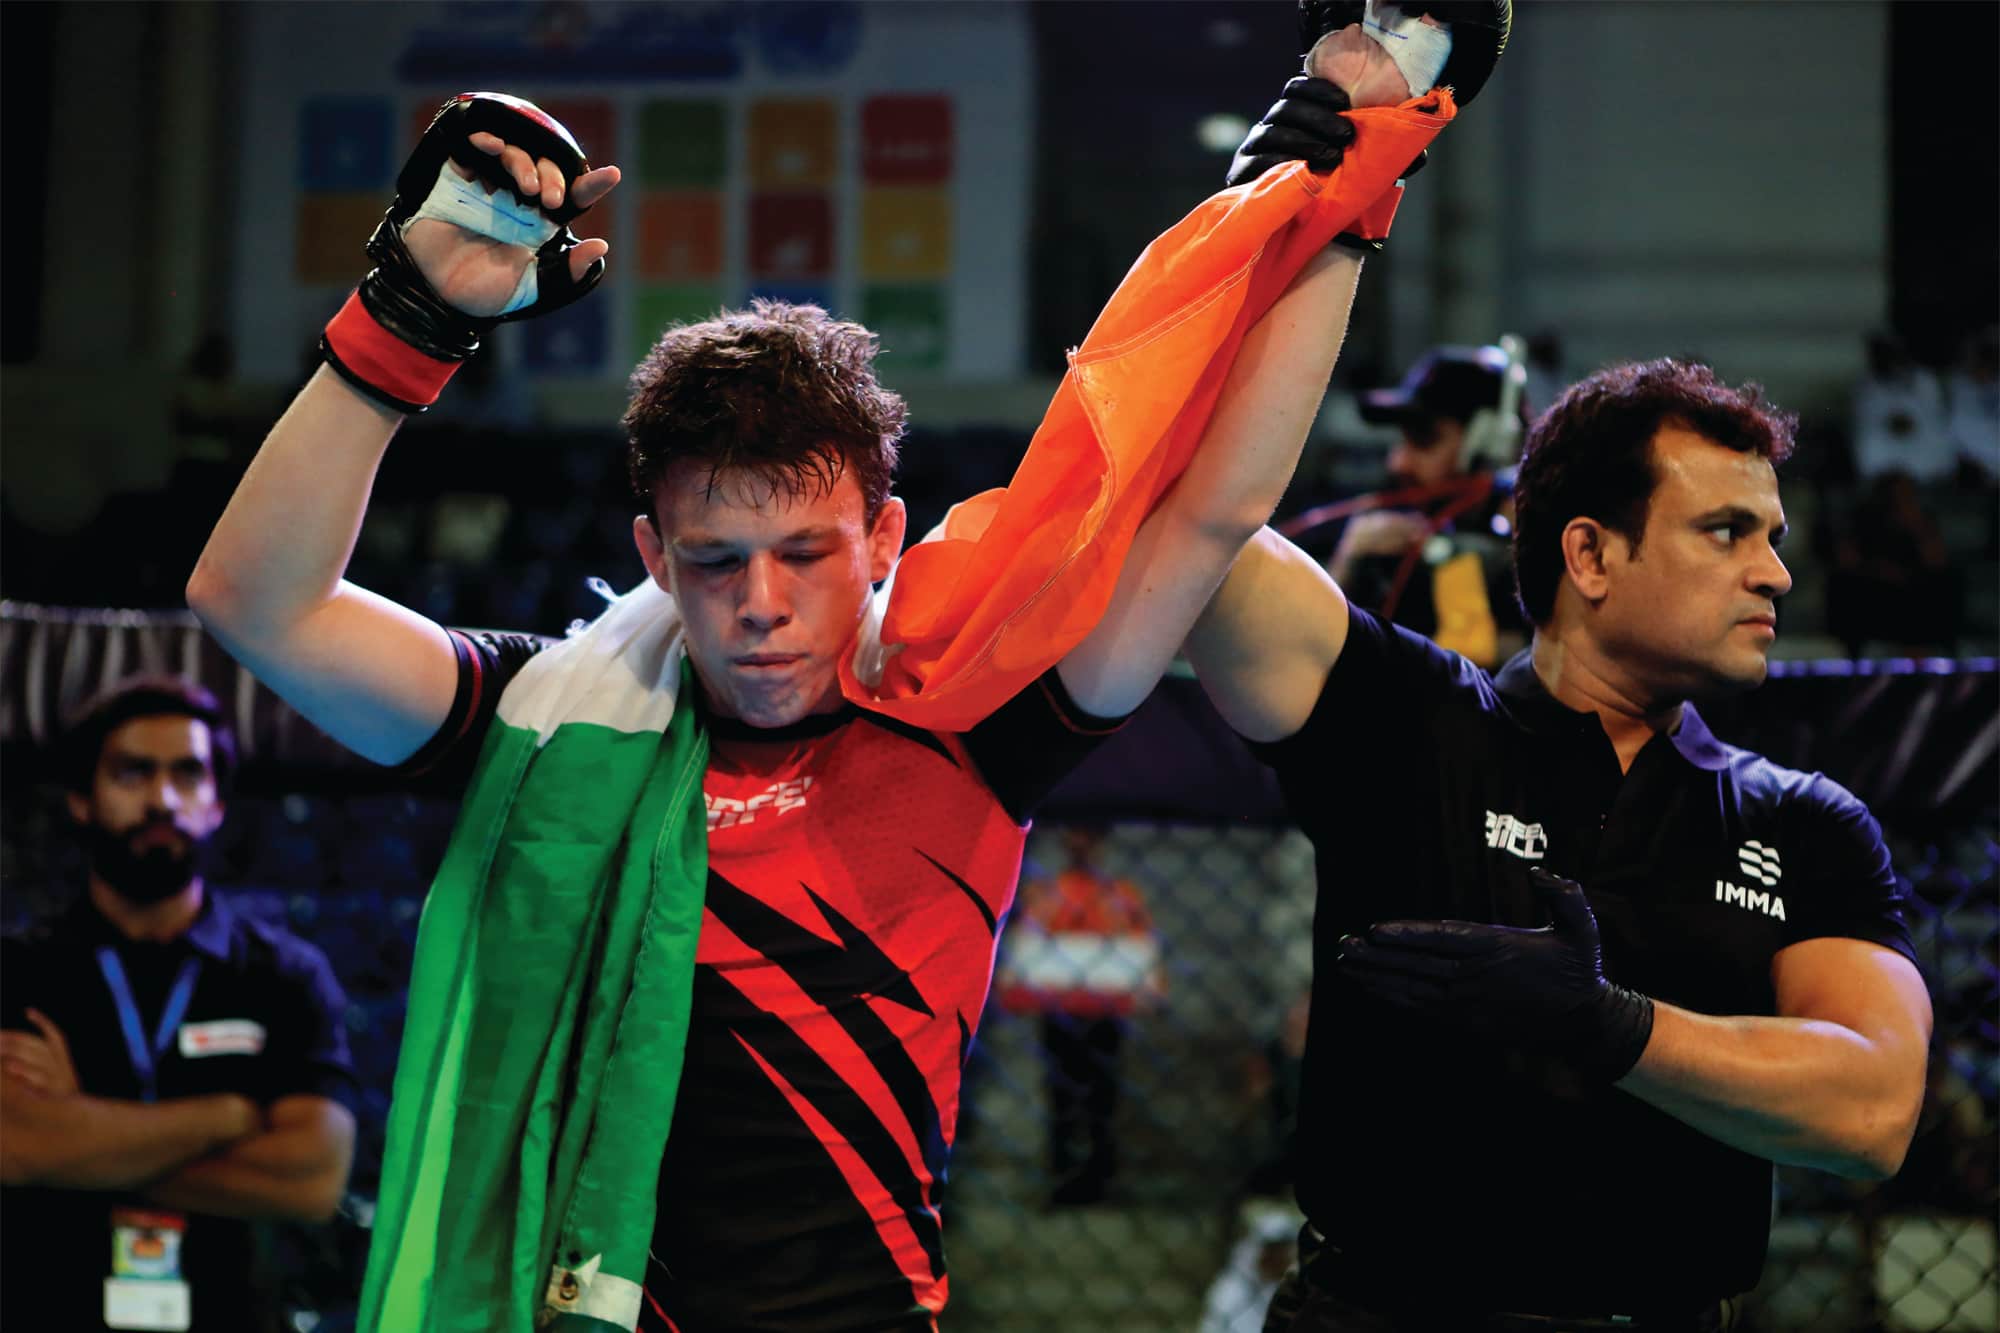 IMMAF Alumni Ciaran Clarke excited to be back in action again